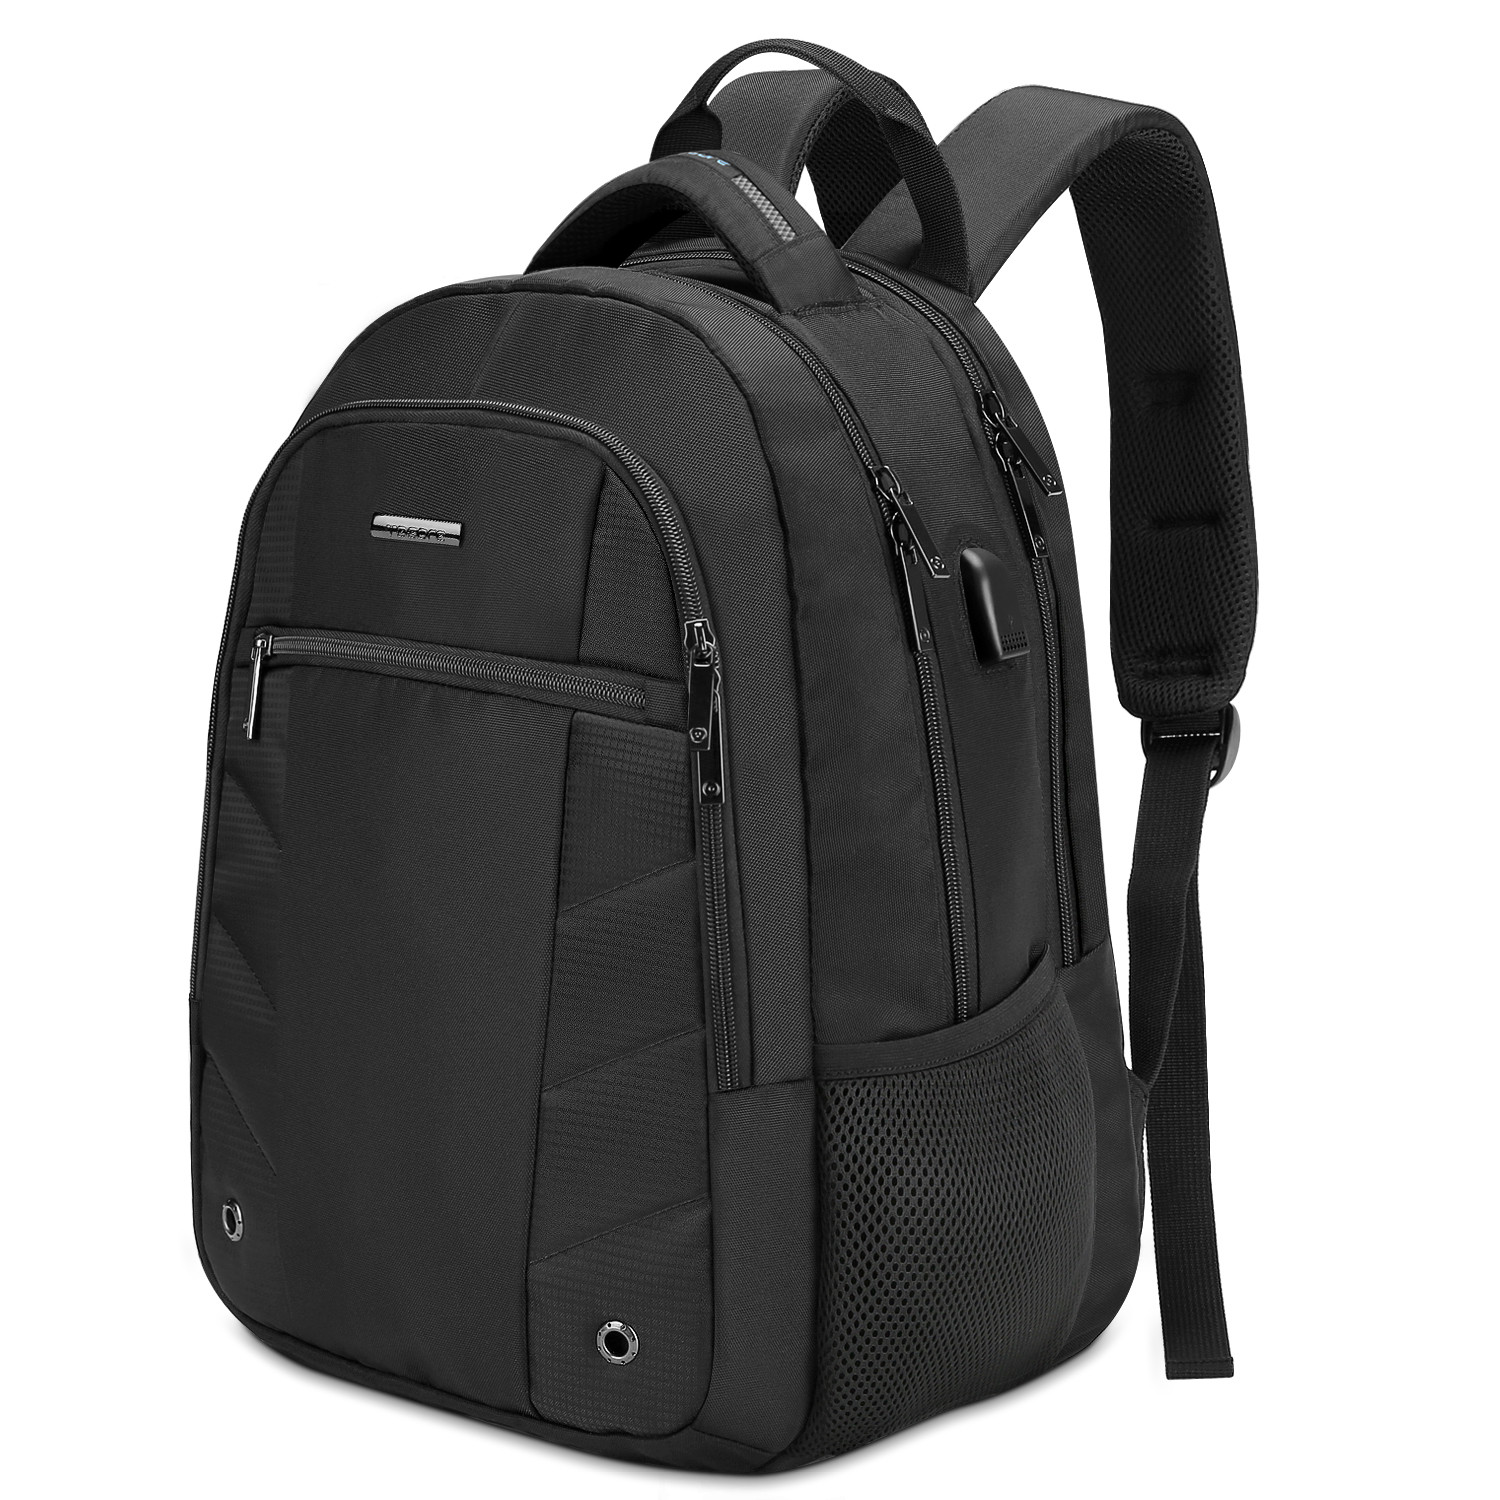 US$ 8 - TOGORE Travel Laptop Backpack, Business Backpack Work Bag with USB Charging Port for ...